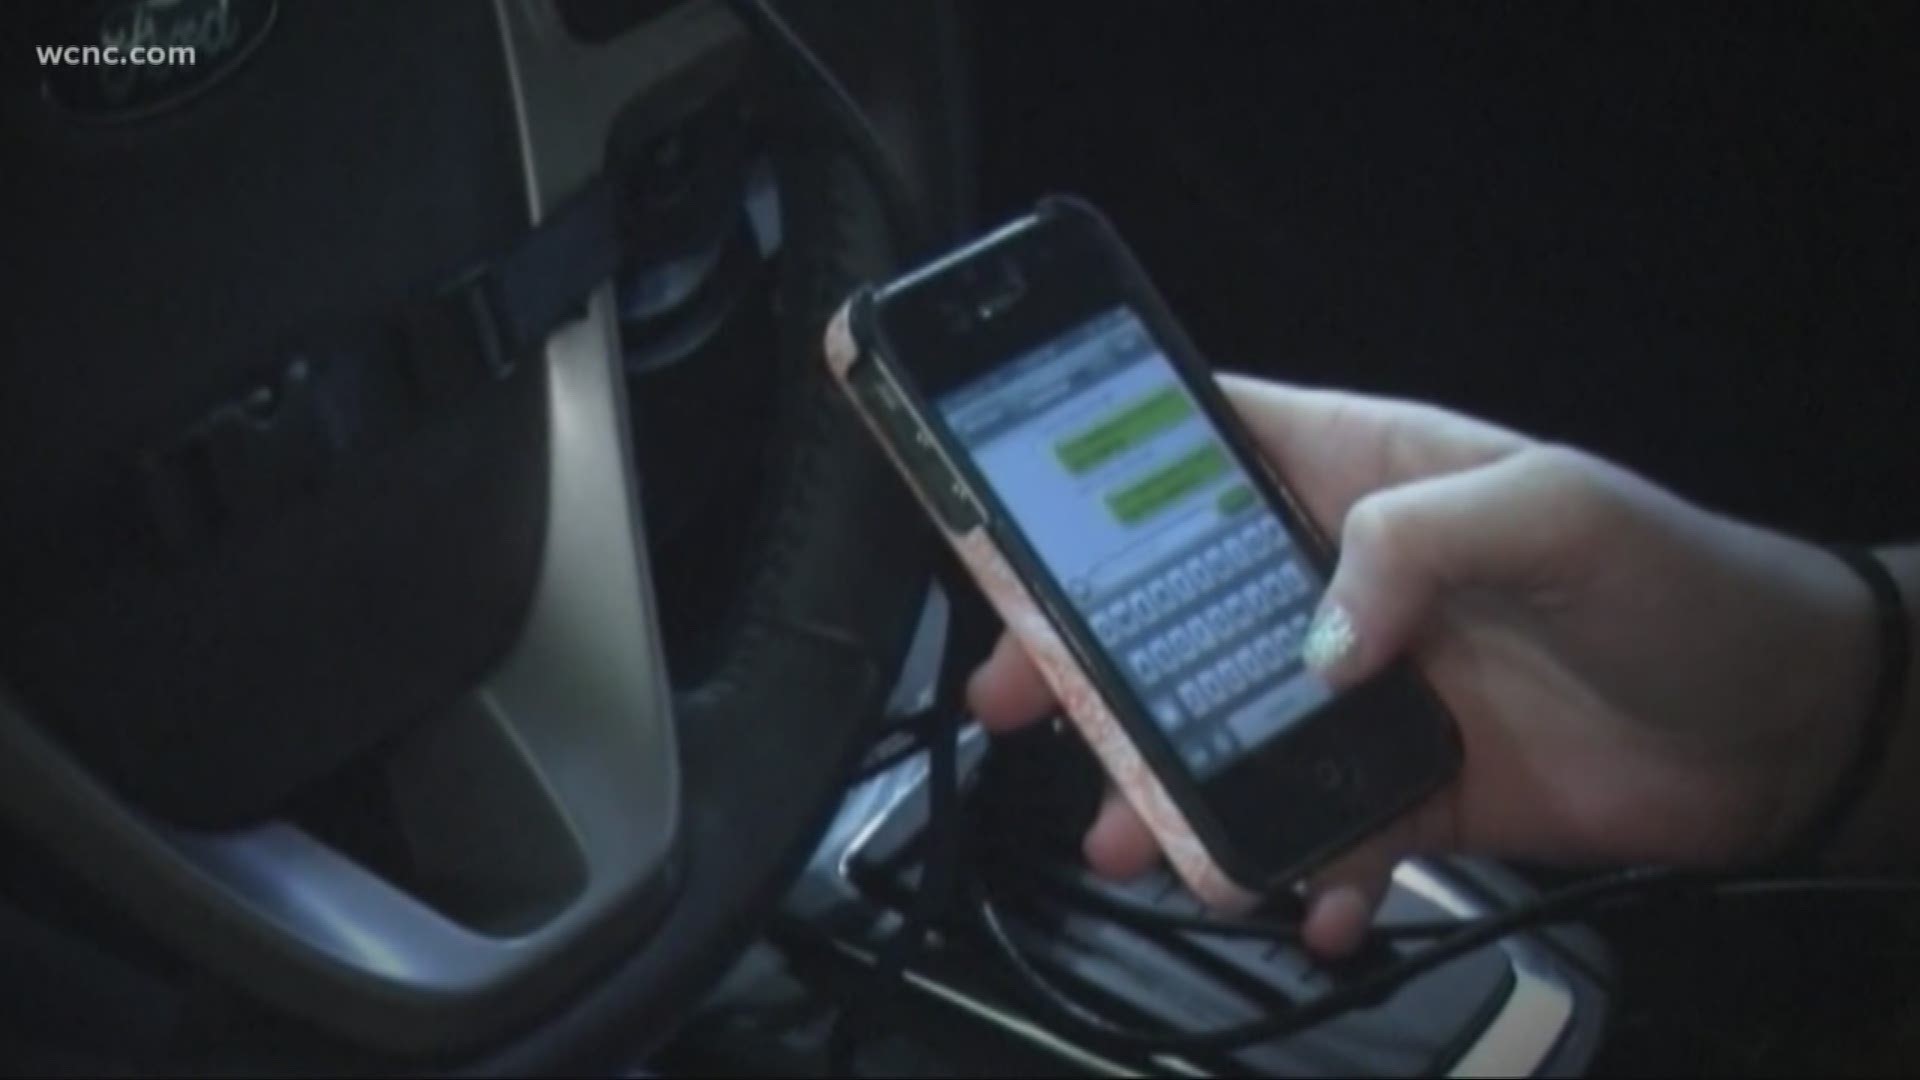 You could soon get a ticket for talking on your cell phone while driving in North Carolina.